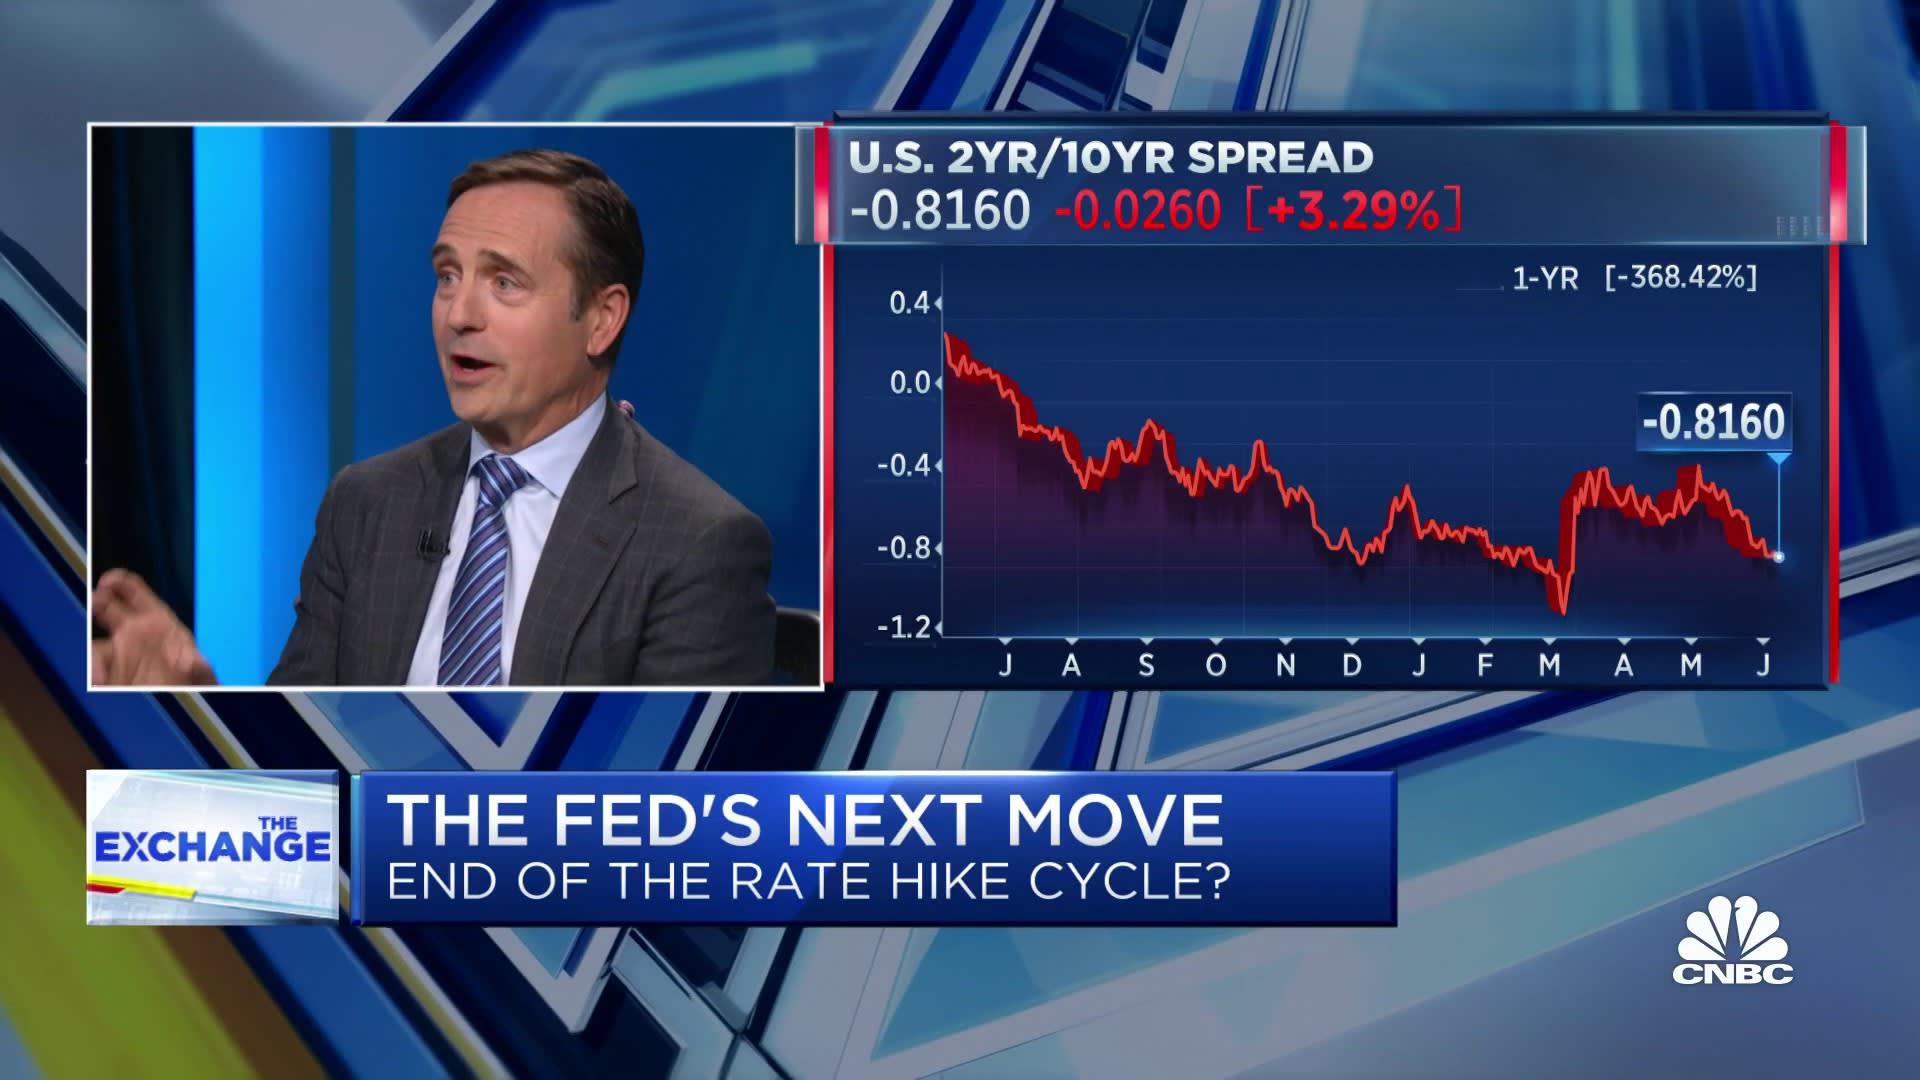 The system is about to have a liquidity shock, says Ironsides Macroeconomics' Barry Knapp